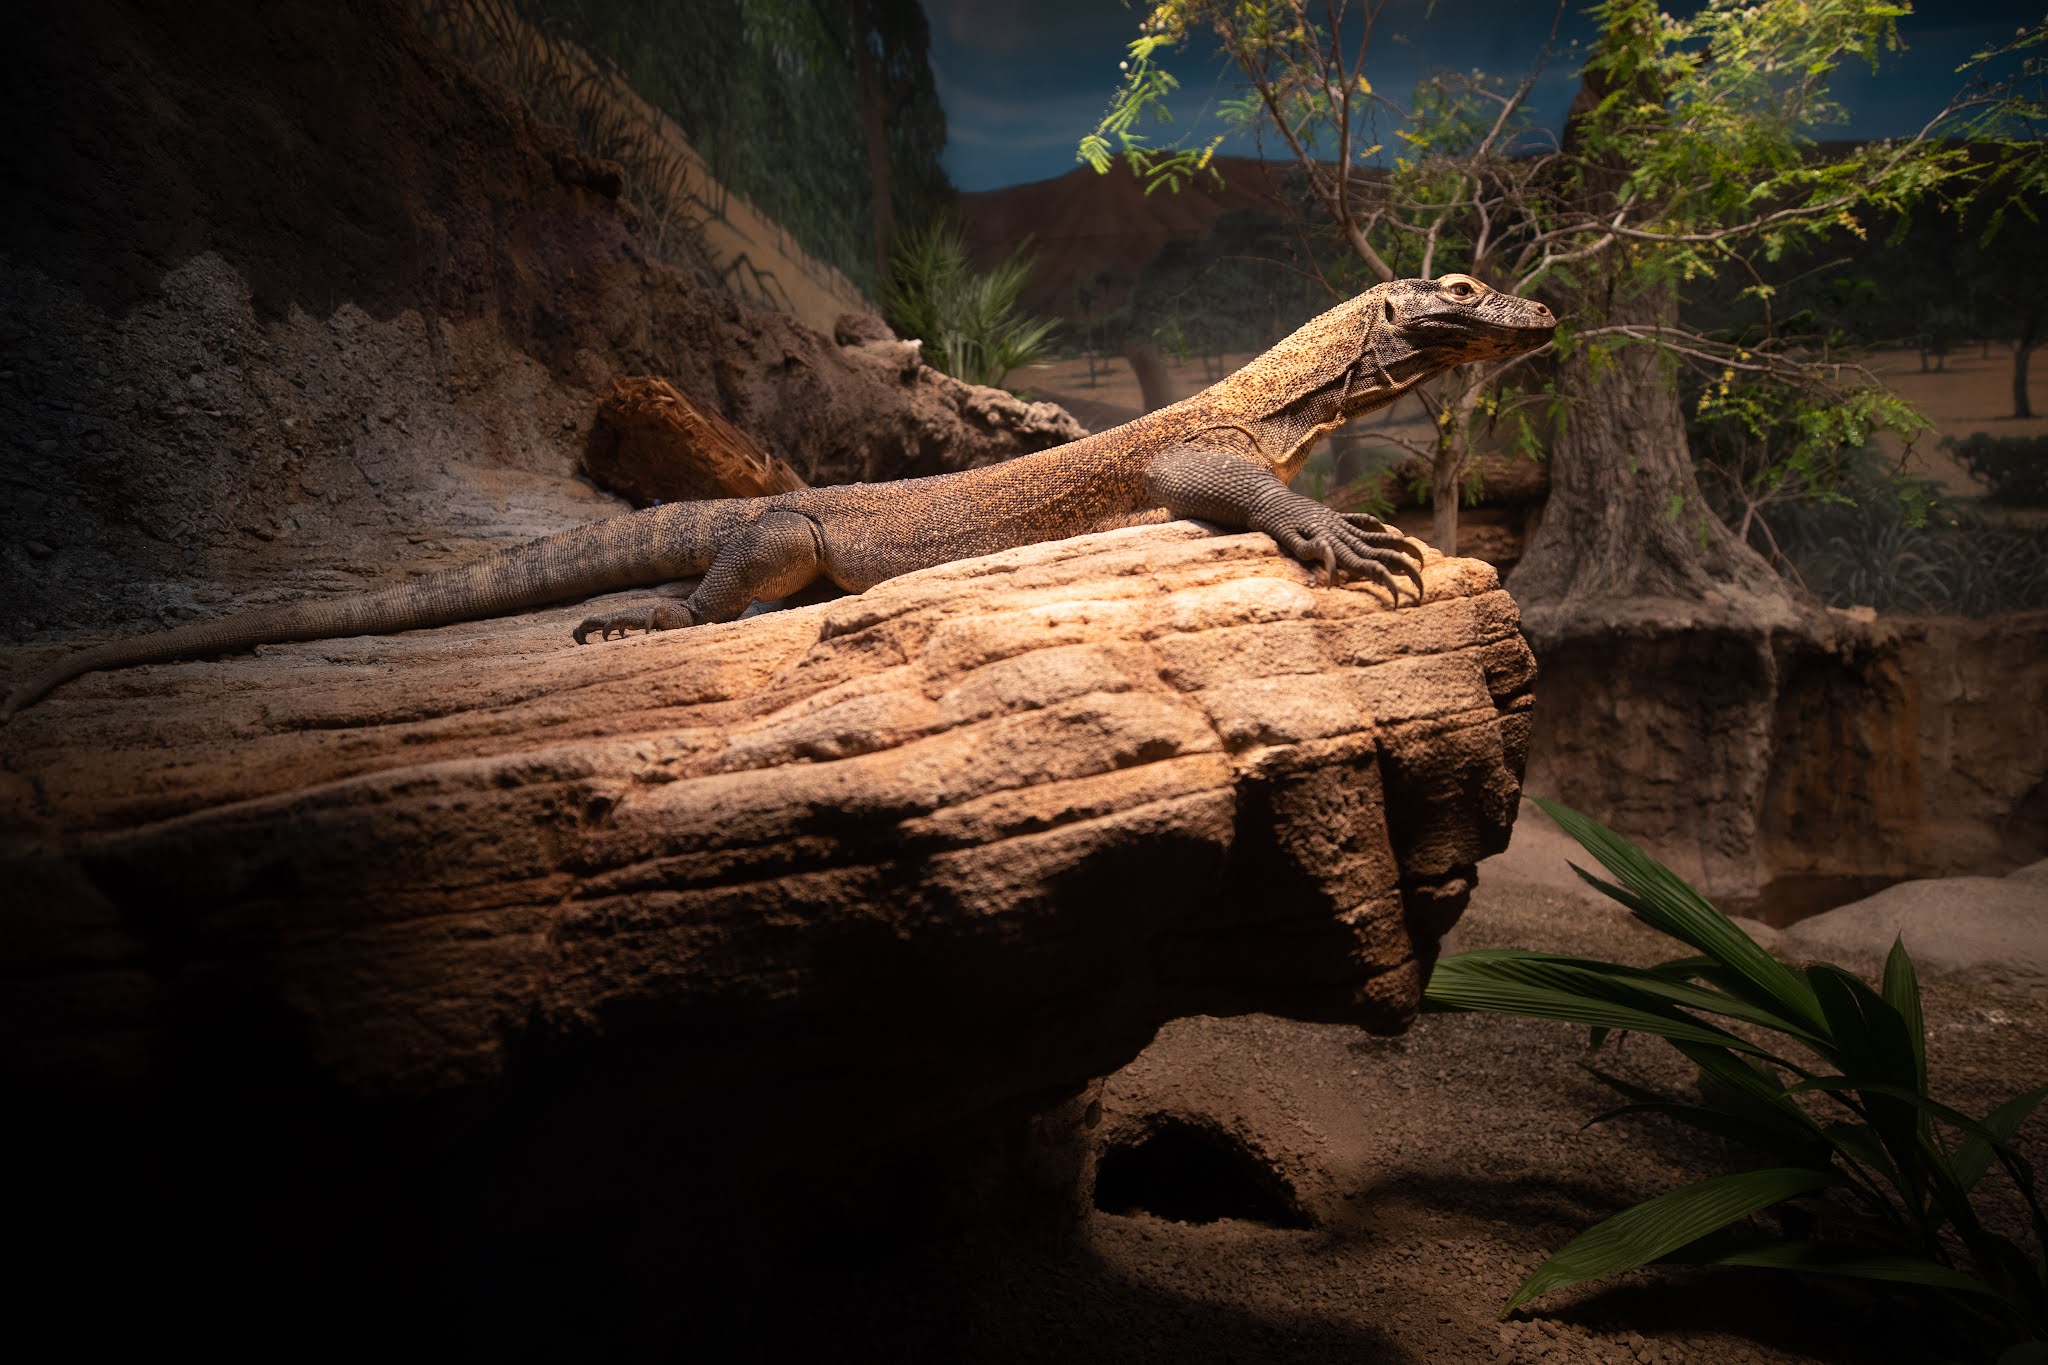 Komodo dragon exhibit is better than ever for the giant lizards and for you!